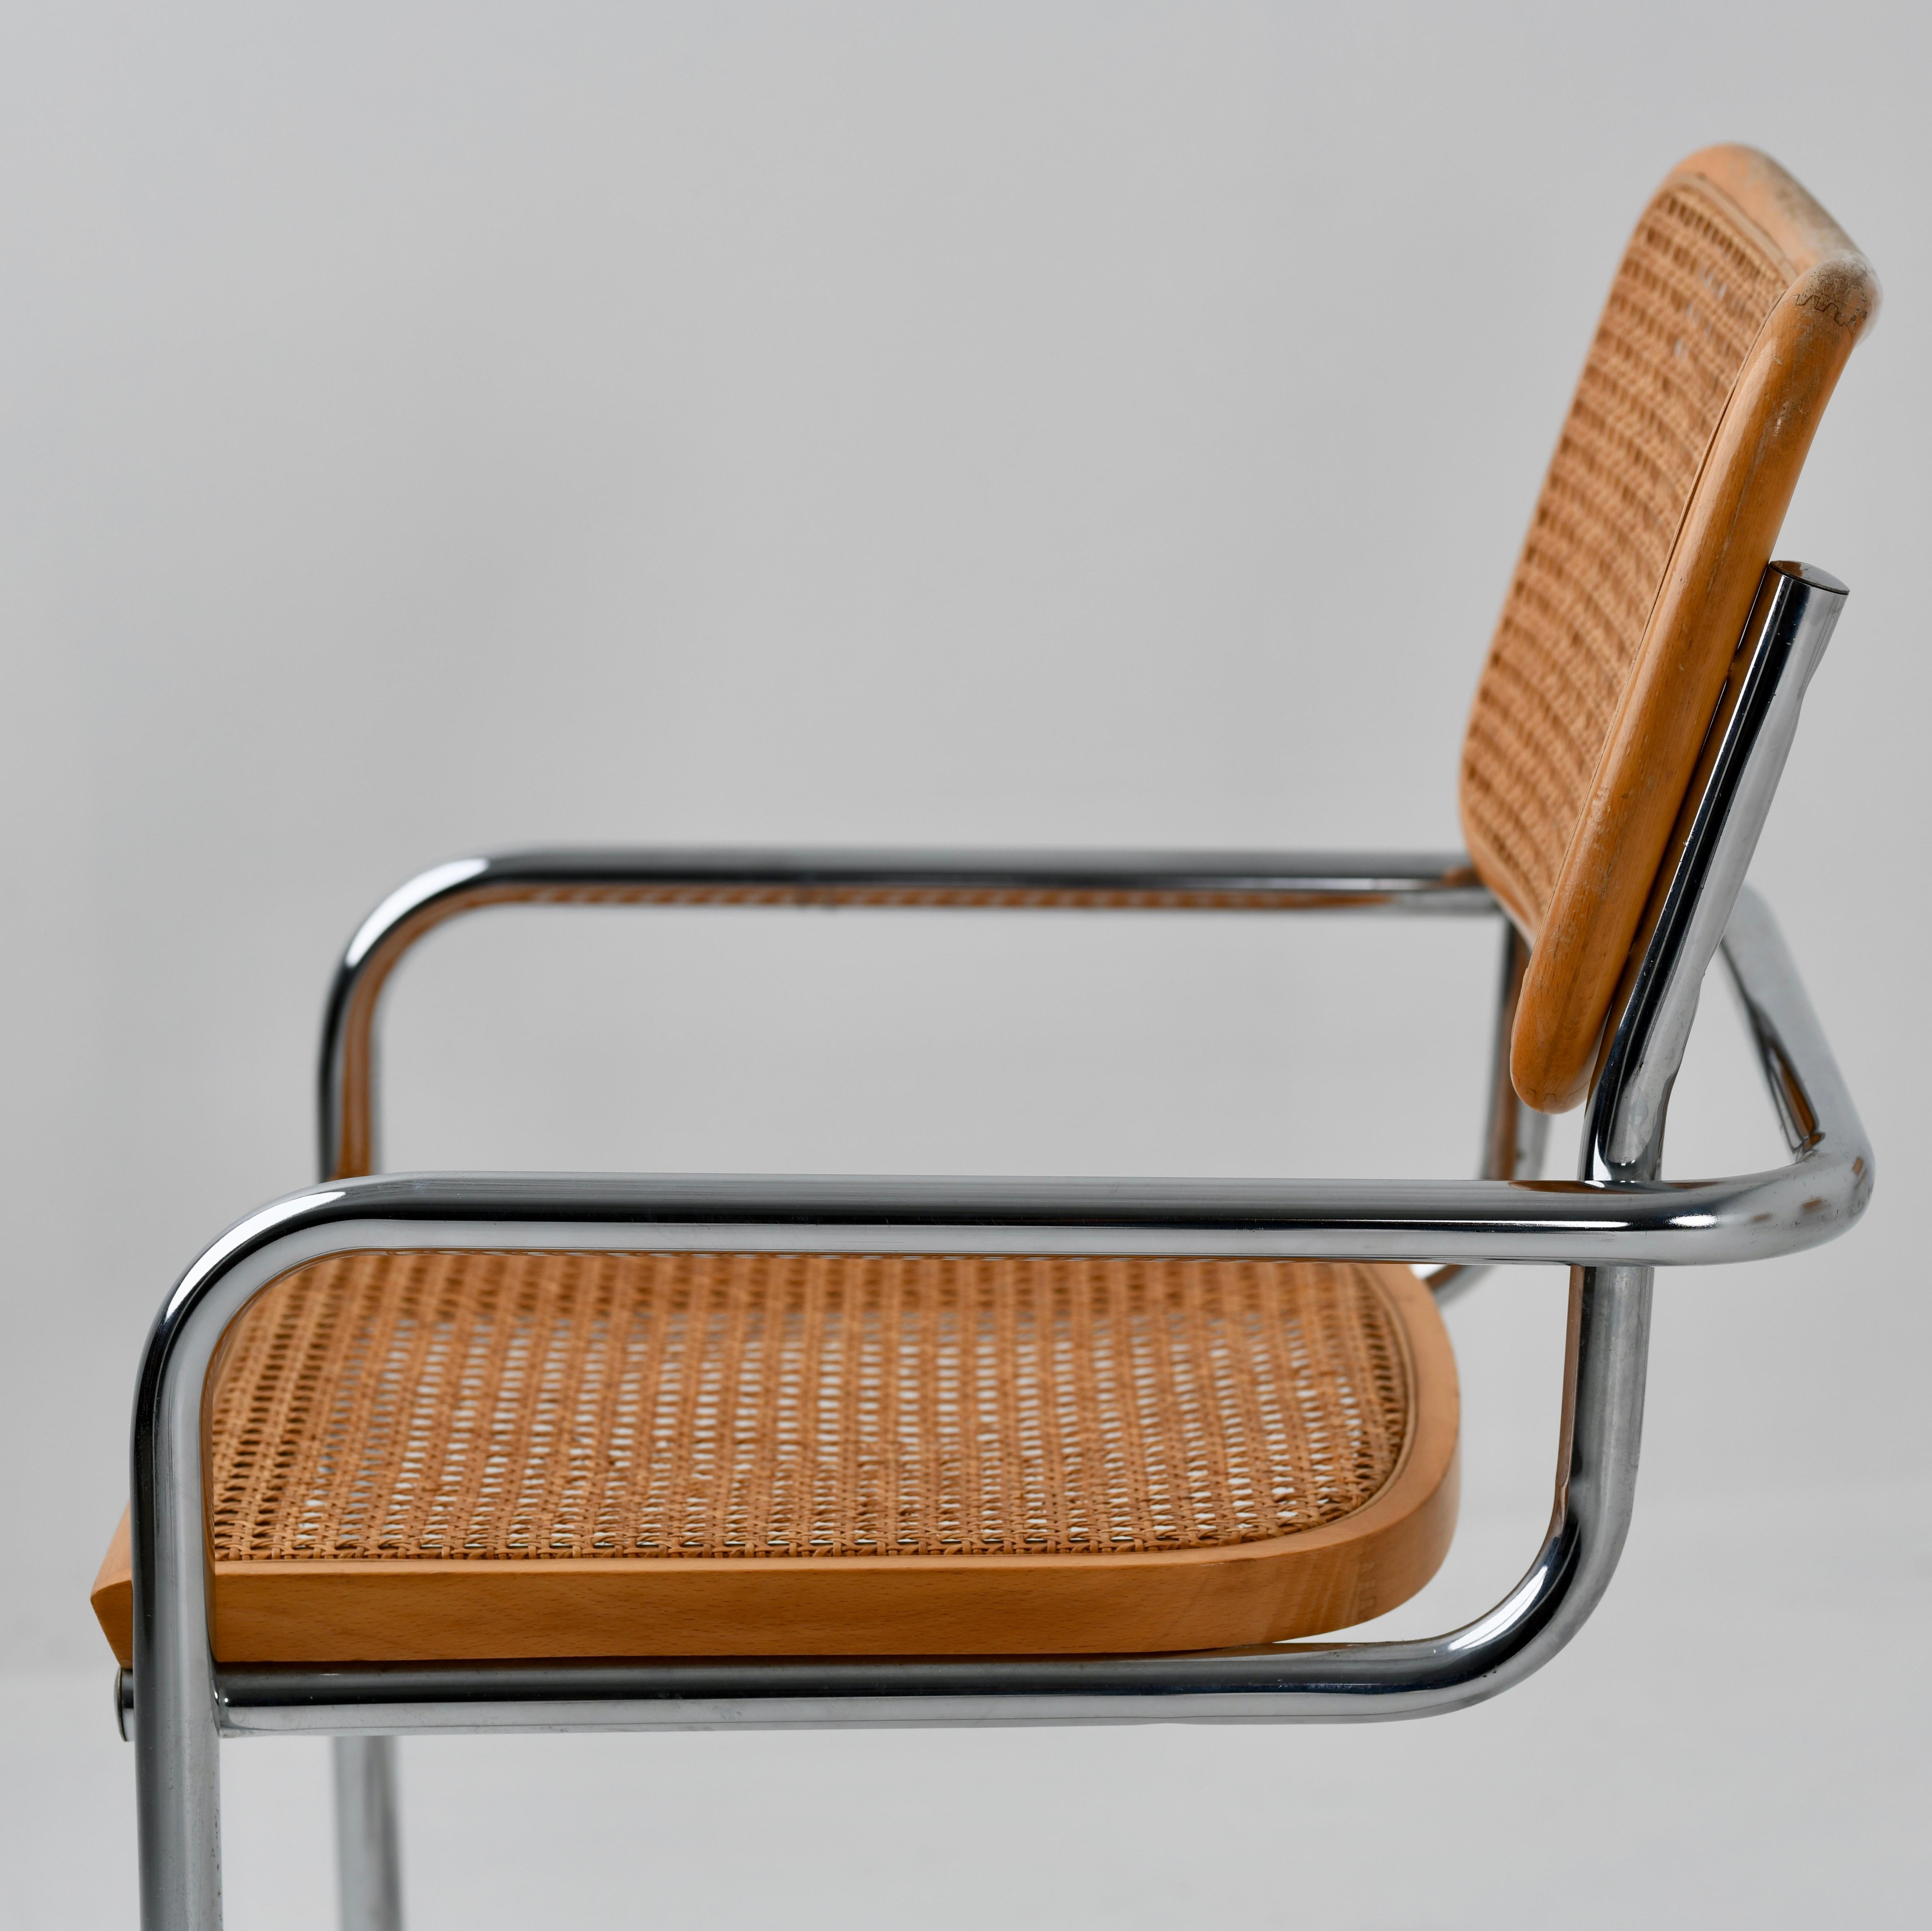 B64 Variant Gavina Marcel Breuer Made in Italy, 1970s In Good Condition For Sale In everton lymington, GB